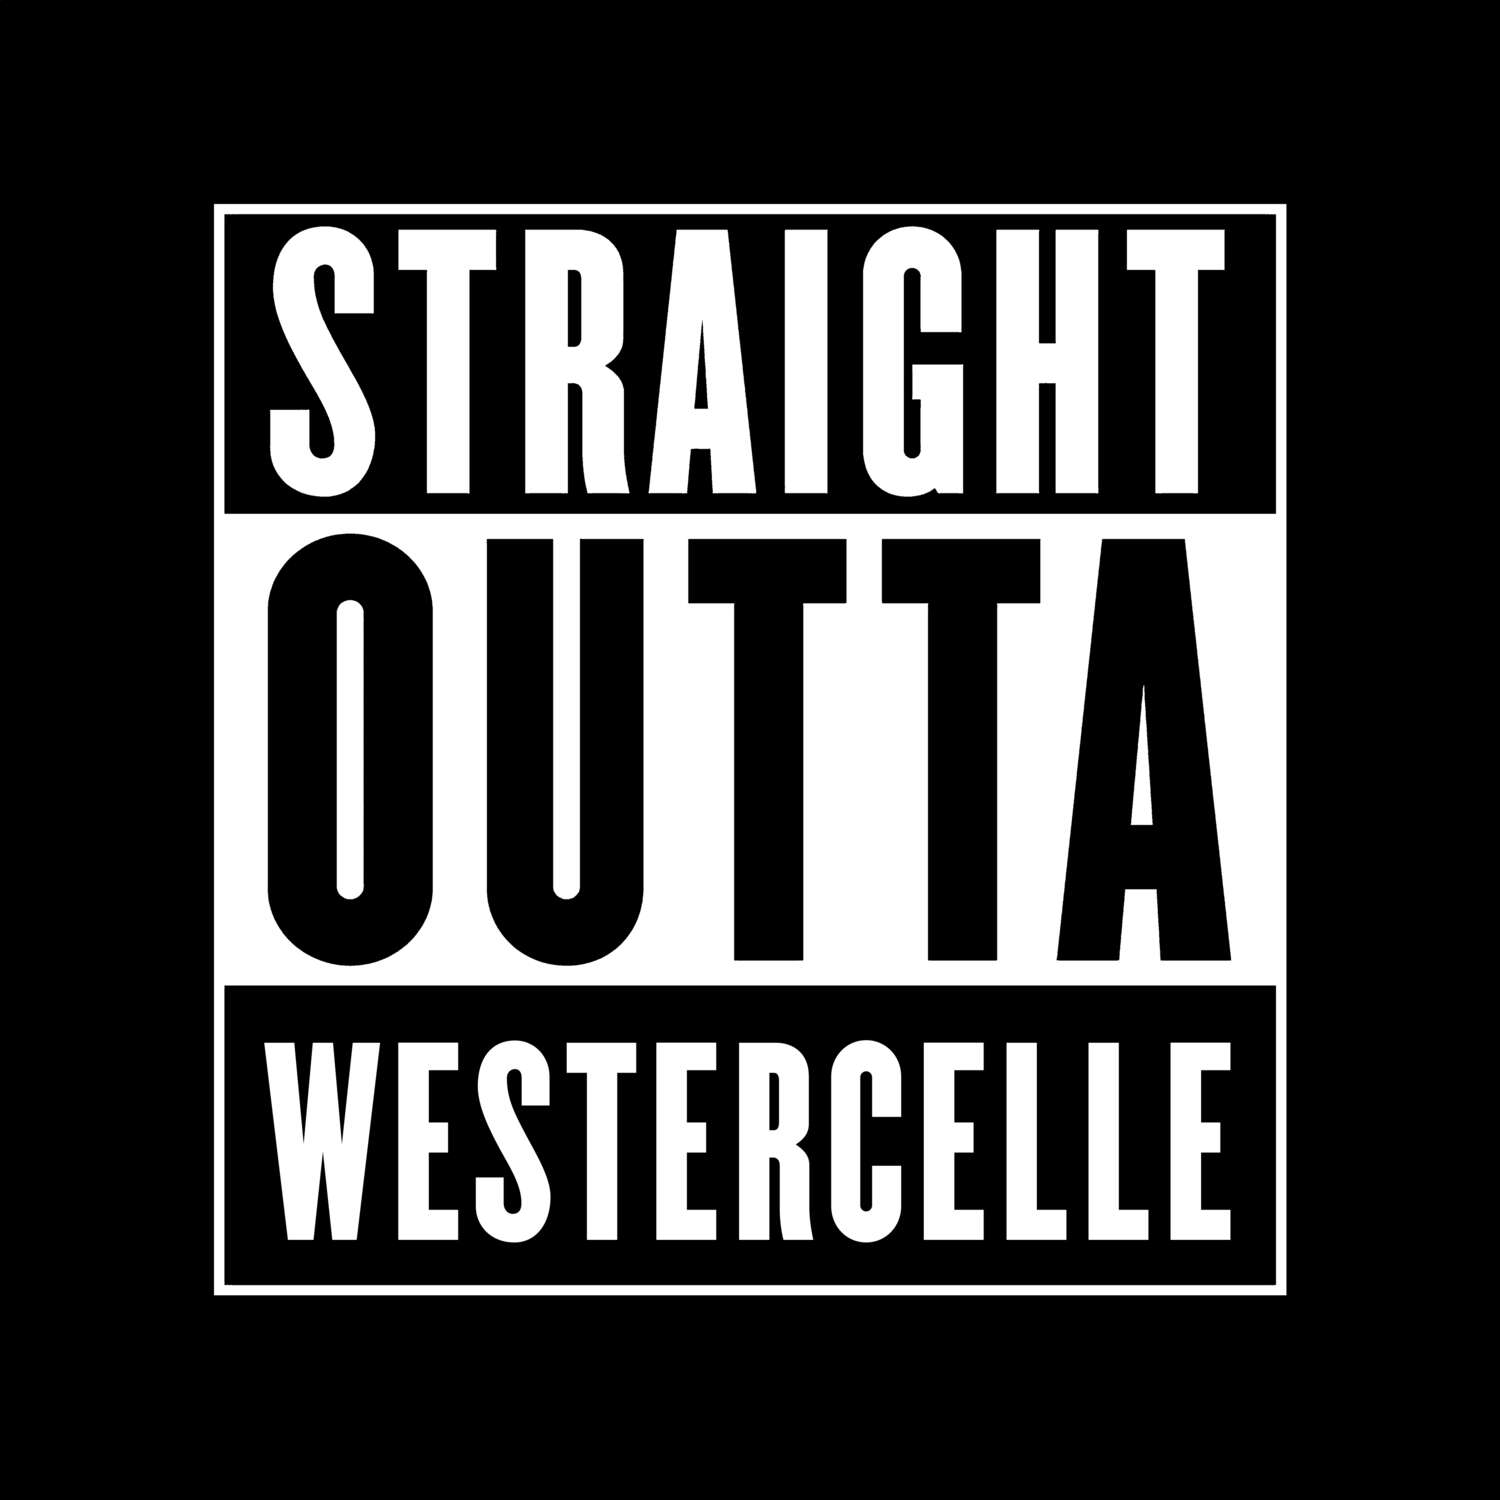 Westercelle T-Shirt »Straight Outta«